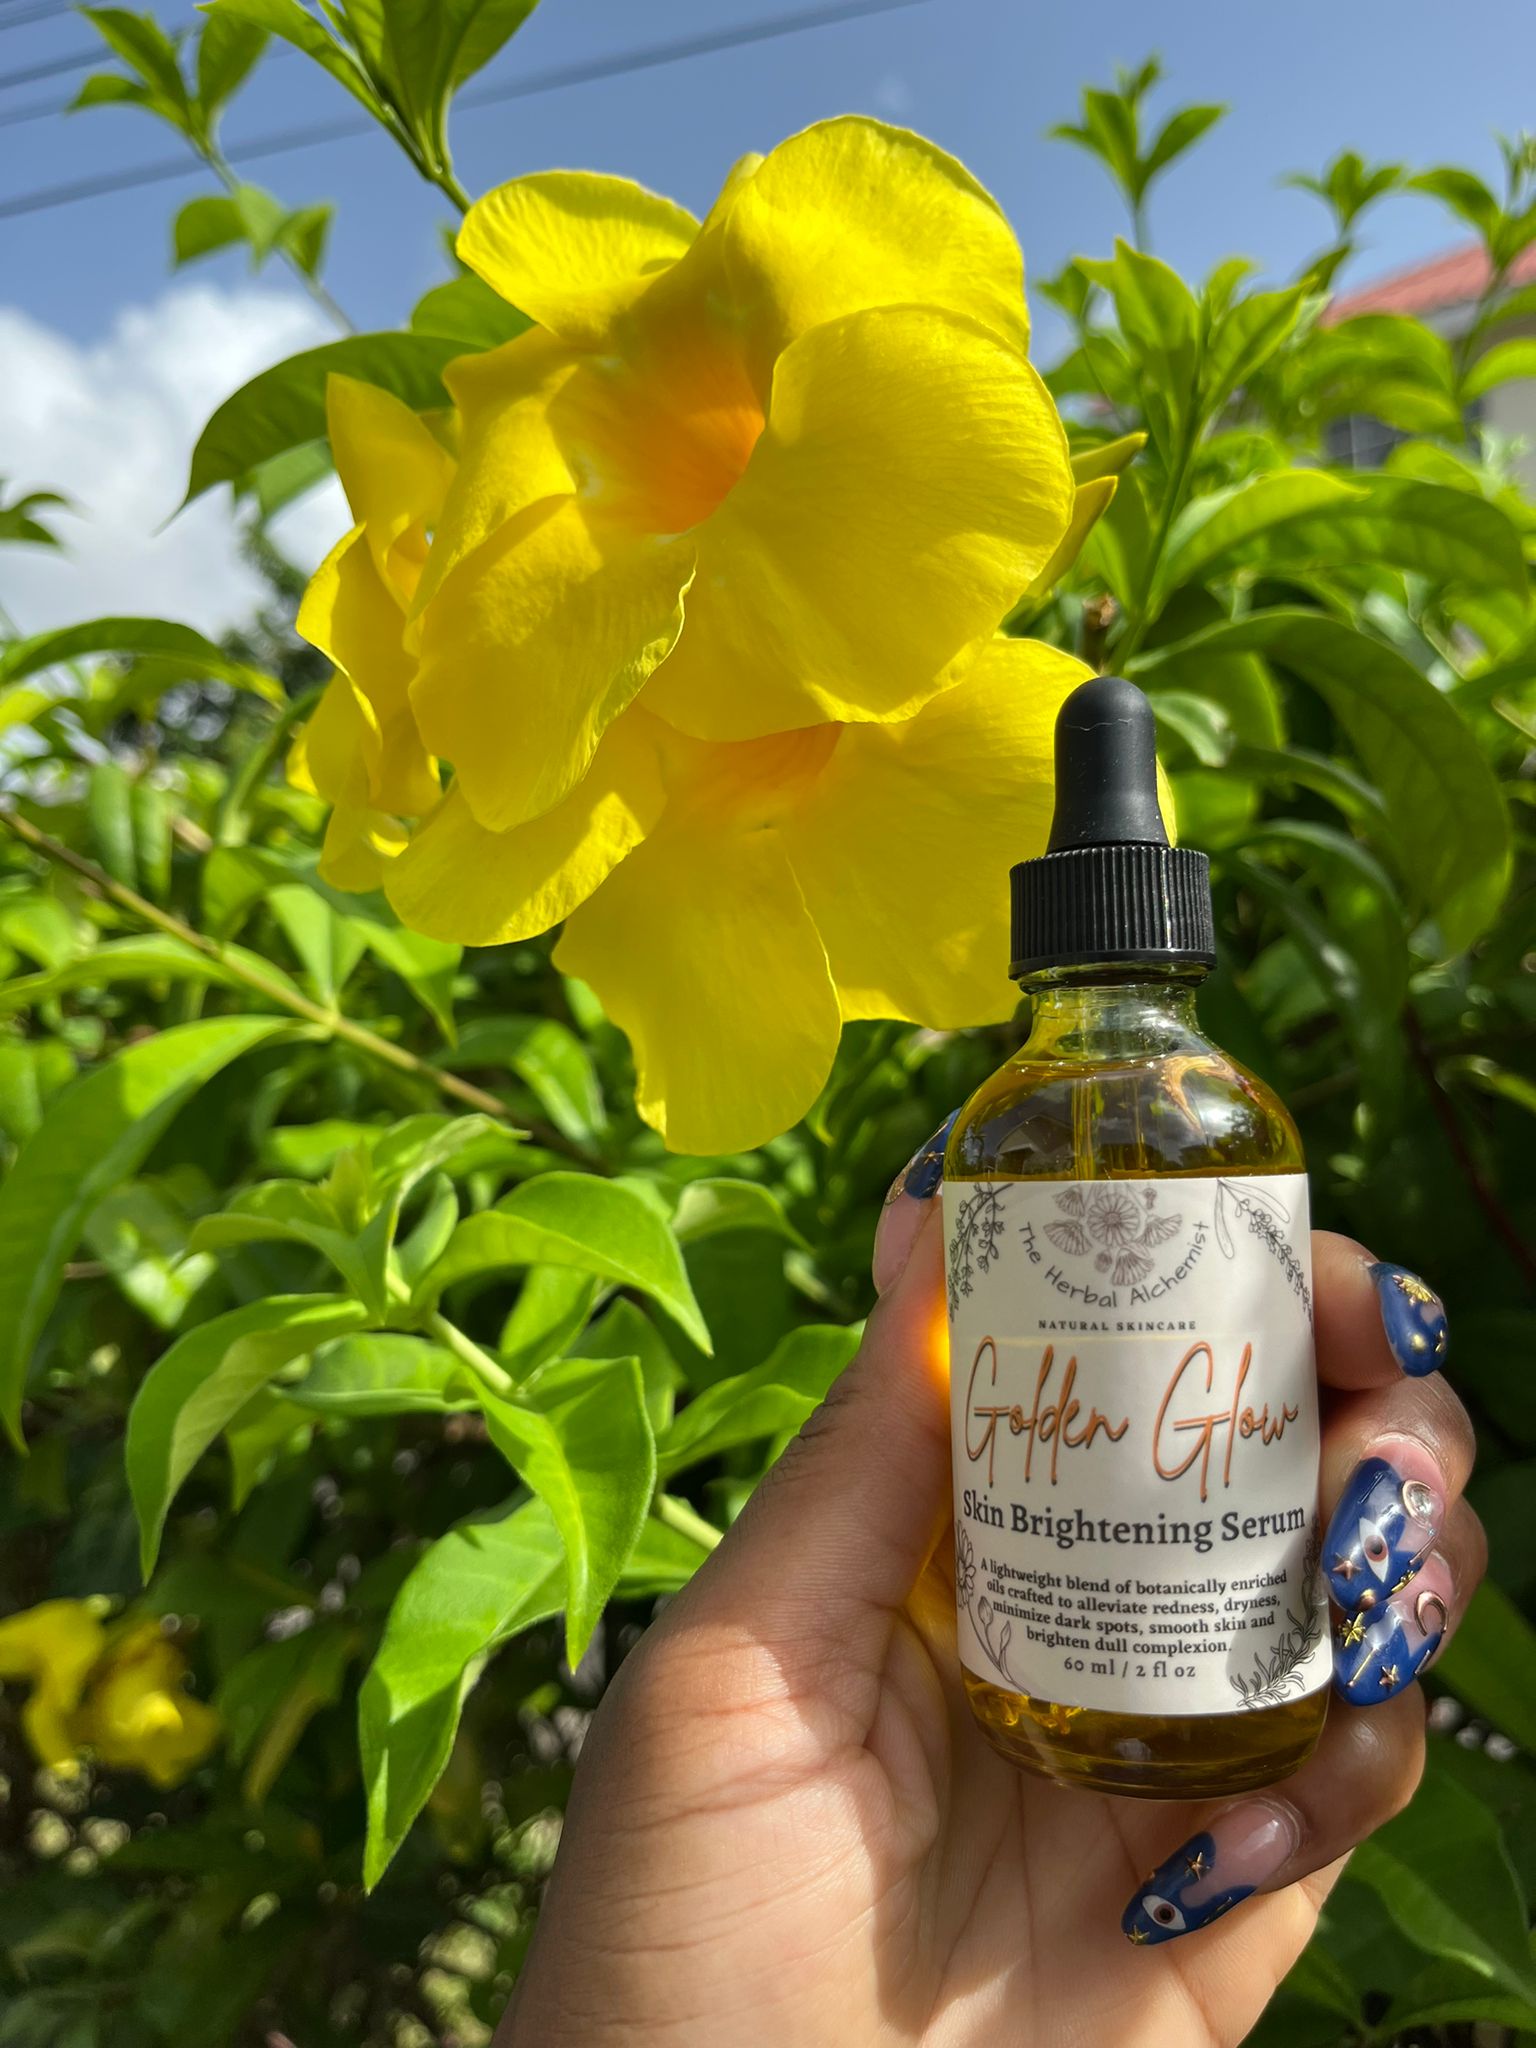 Golden Glow Skin Brightening Serum - Organic Facial Serum for even toned skin, say goodbye to unwanted dark spots and hello to supple, glowy skin - The Herbal Alchemist